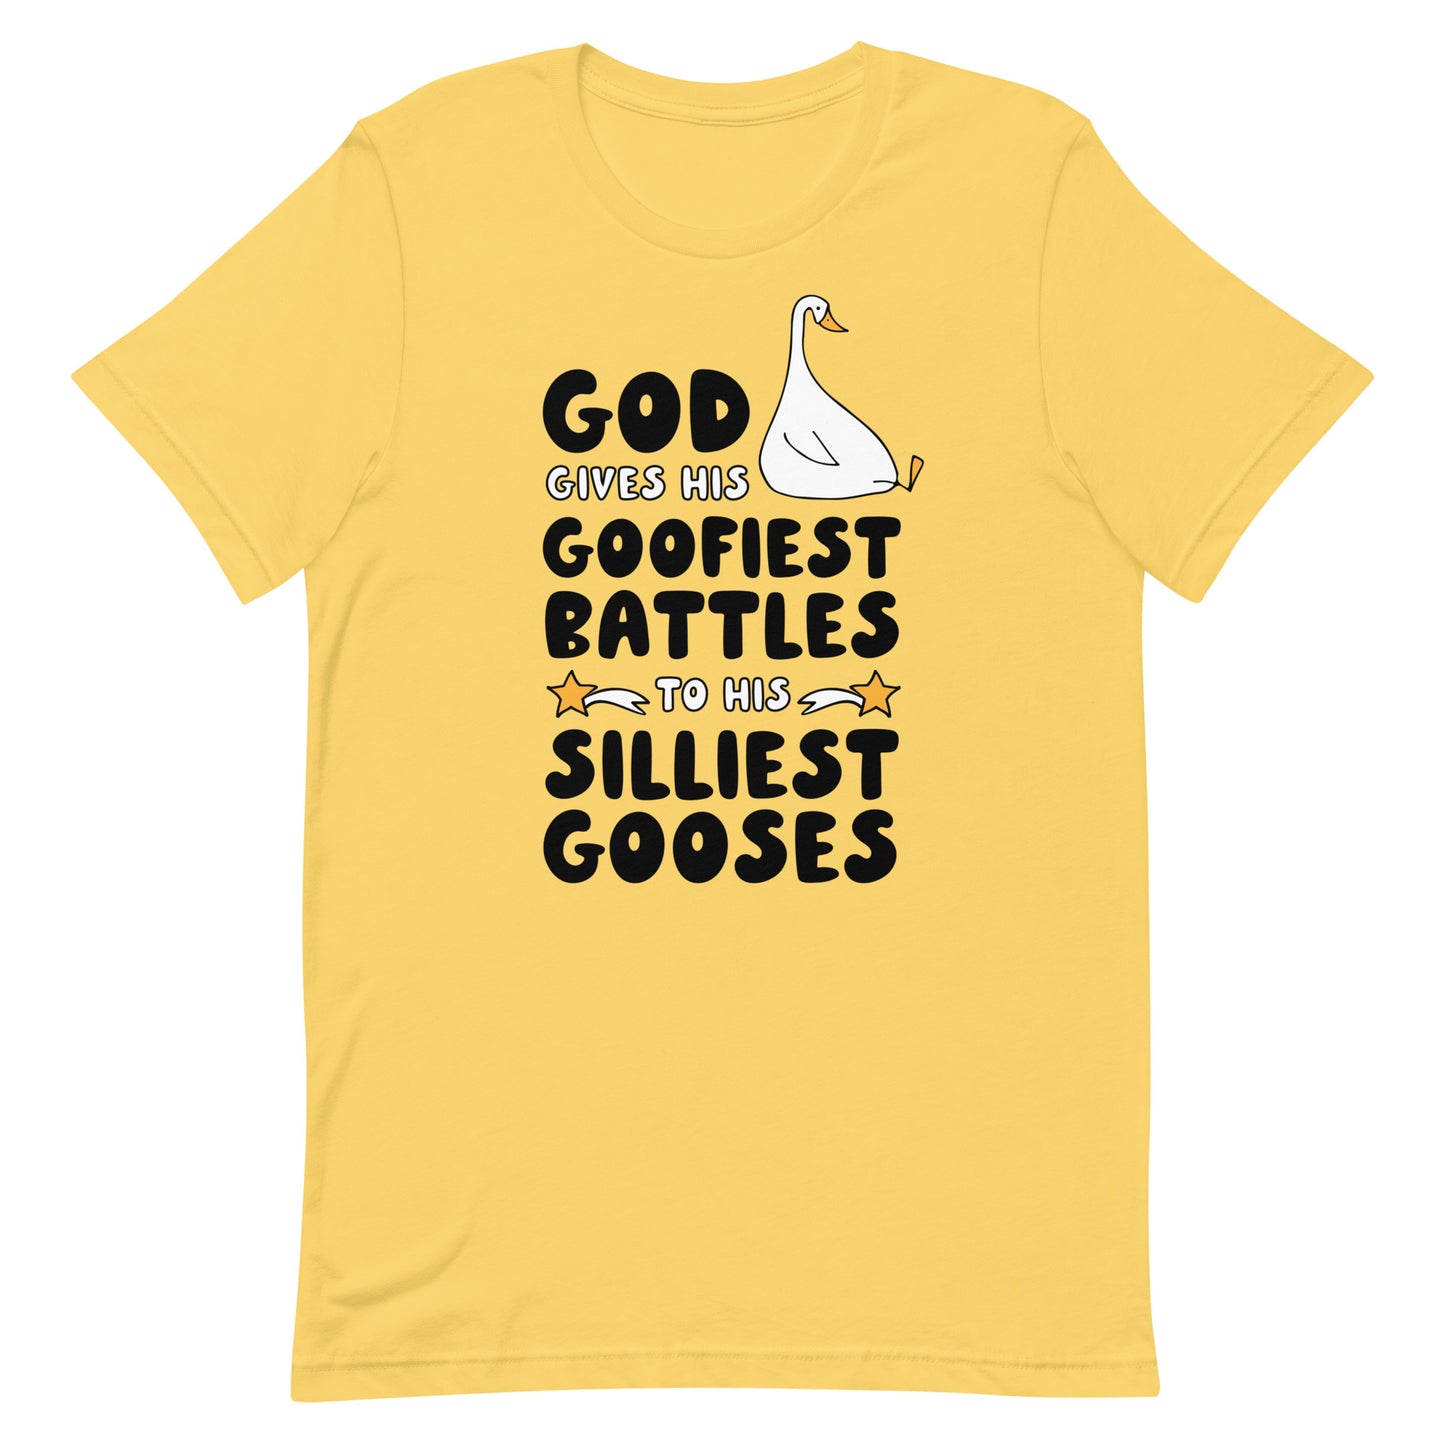 God Gives His Goofiest Battles to His Silliest Gooses Unisex t-shirt